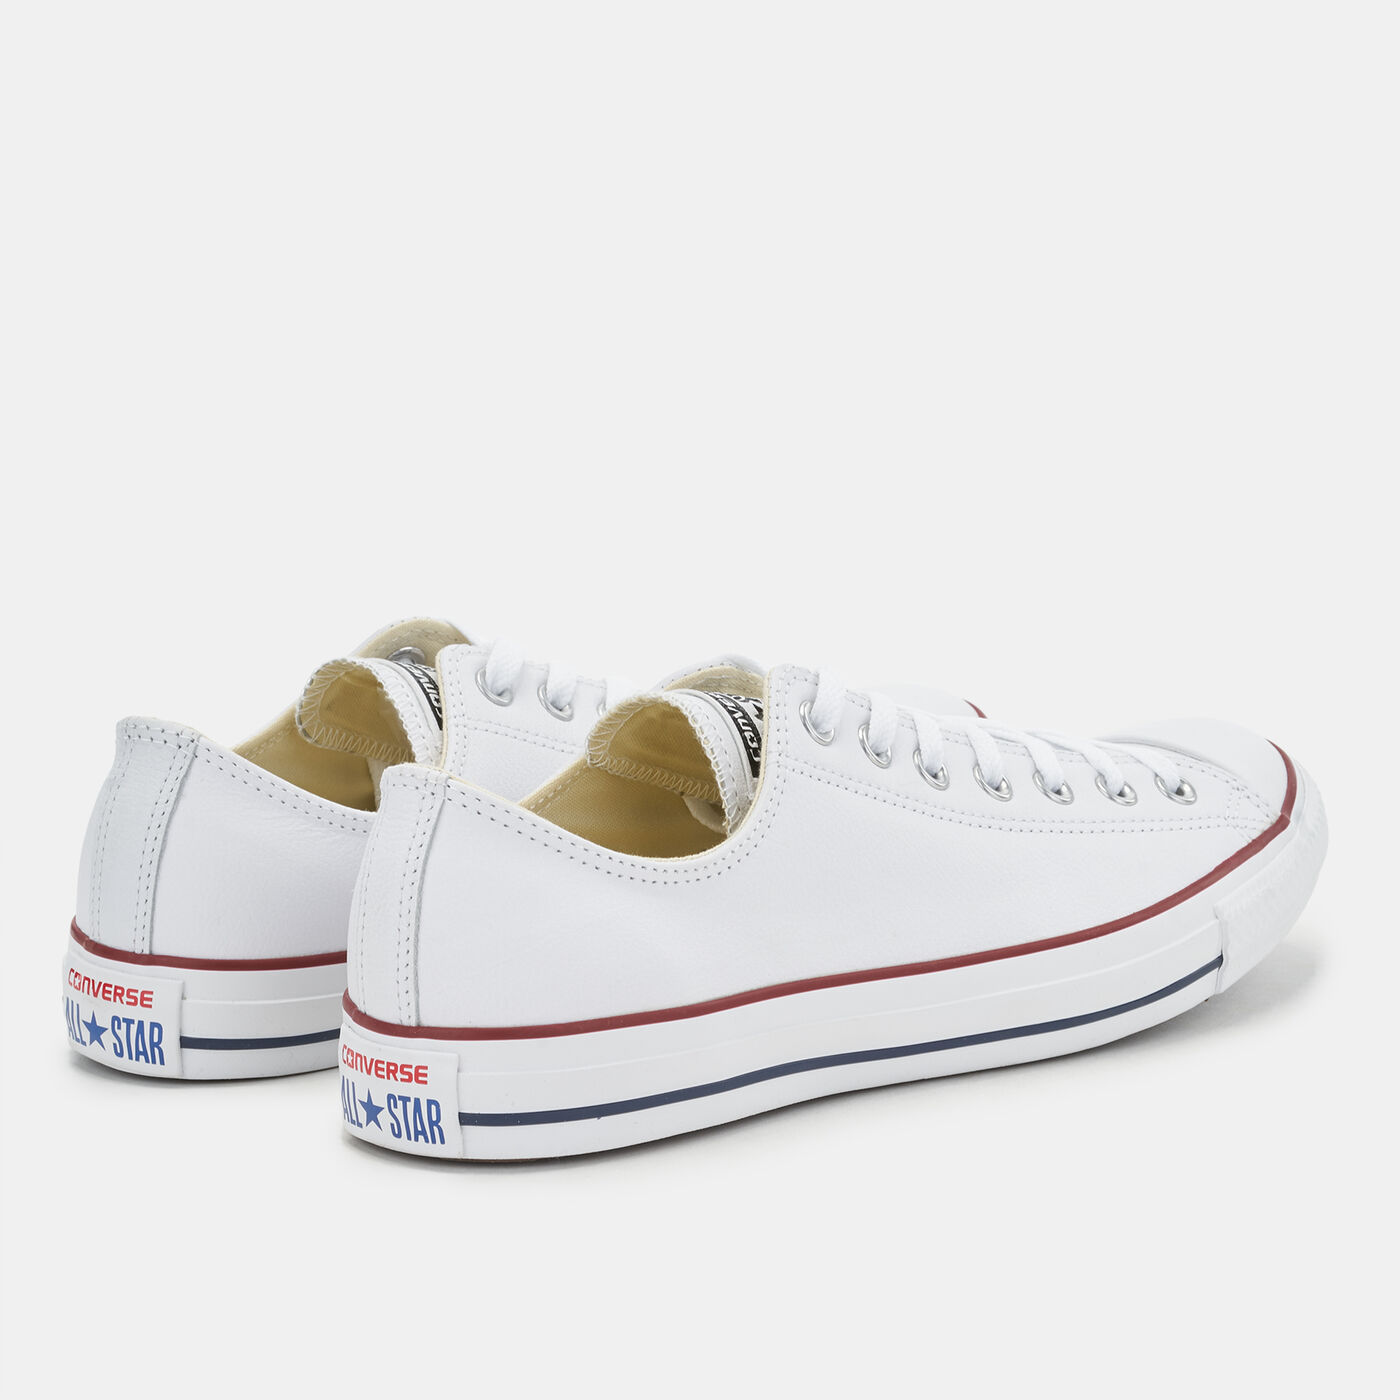 Chuck Taylor All Star Leather Unisex Shoe